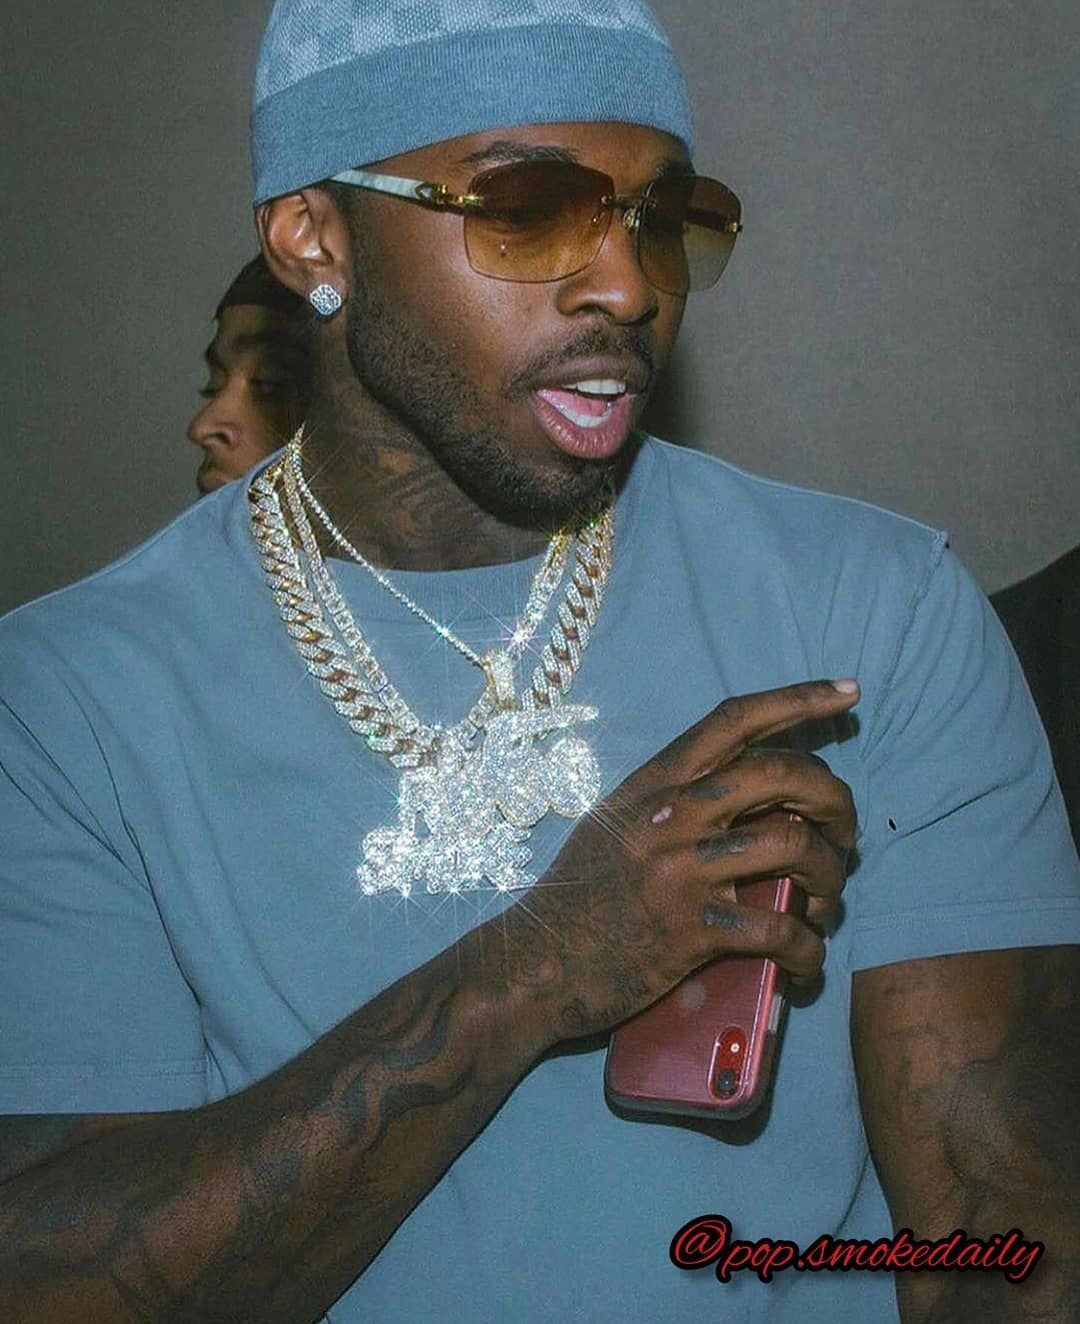 Rapper YFN Lucci in a blue shirt and a blue hat holding a red iPhone - Pop Smoke